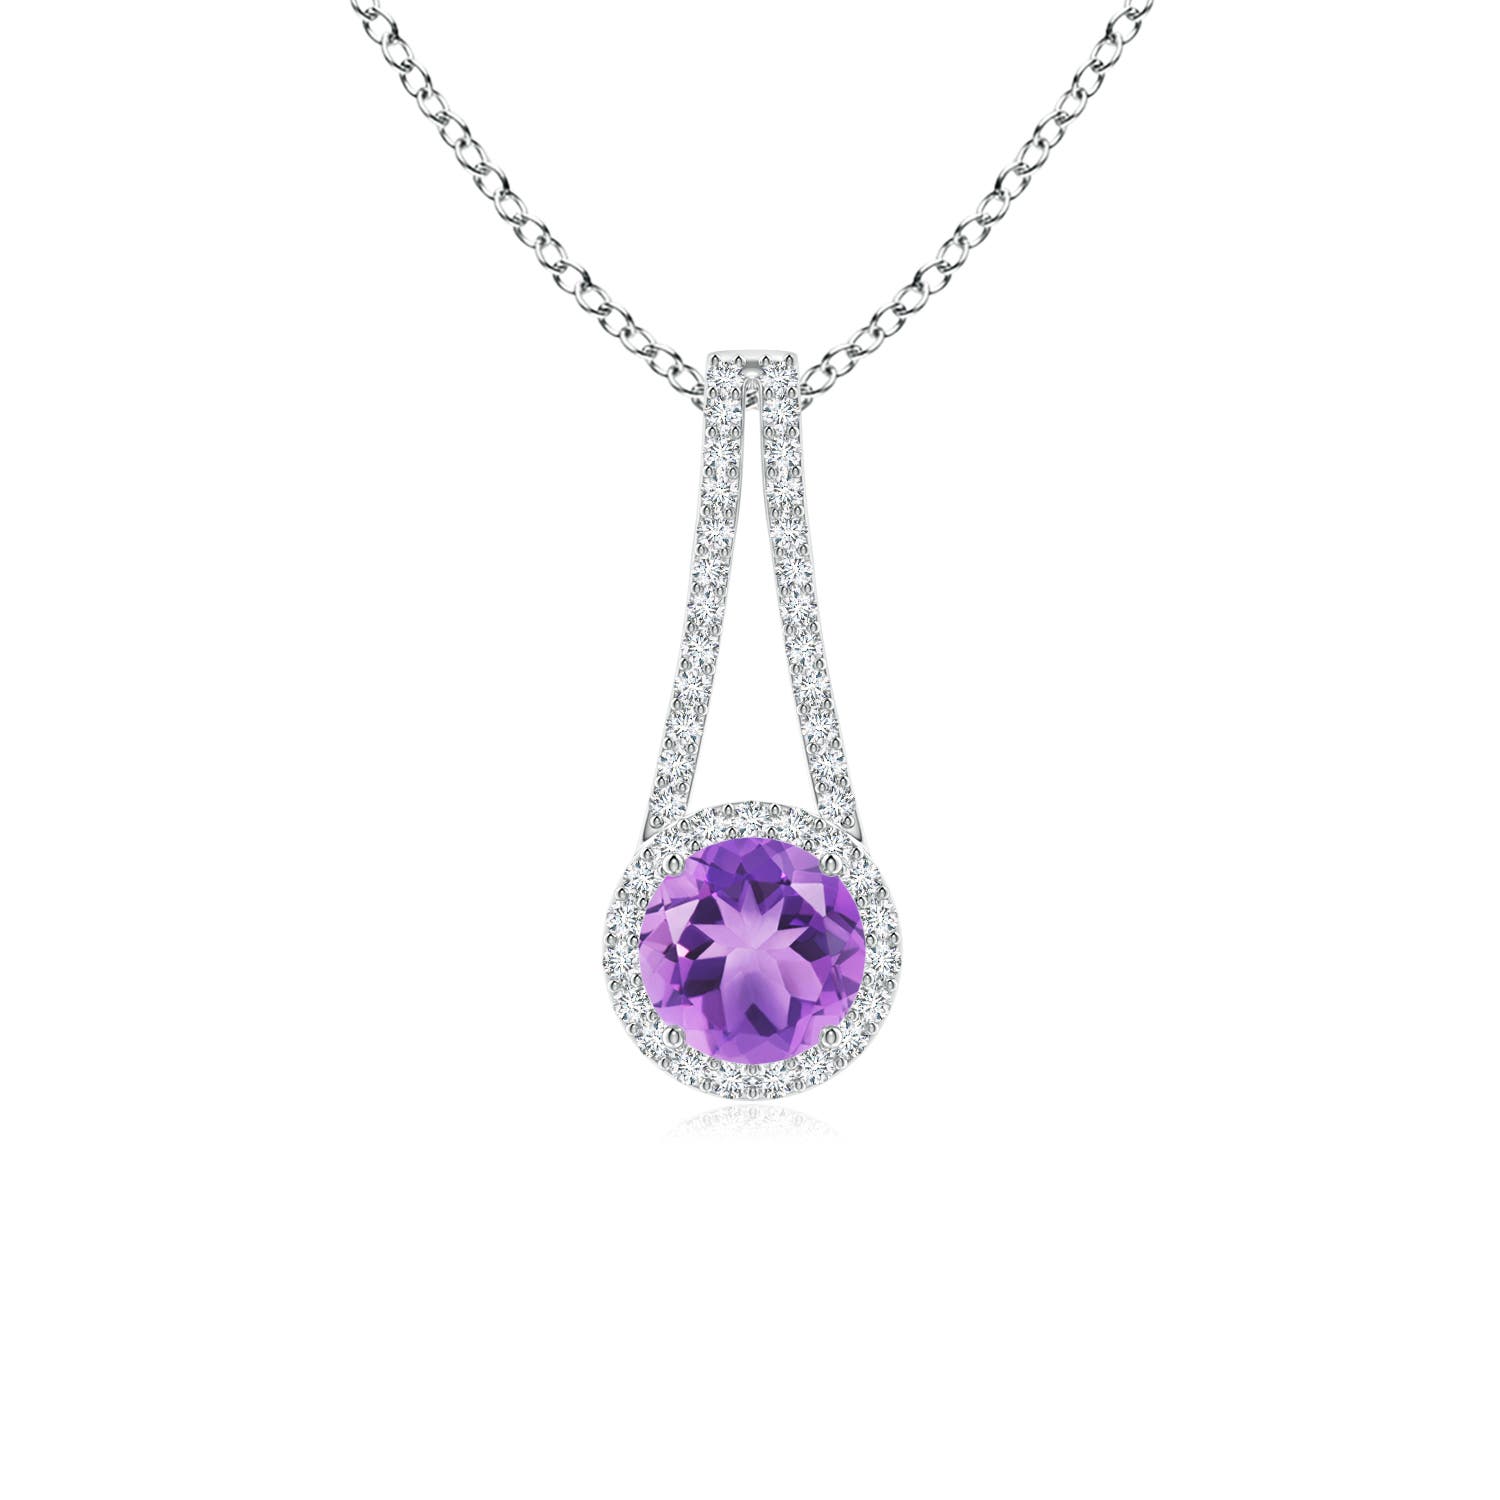 A - Amethyst / 1.02 CT / 14 KT White Gold